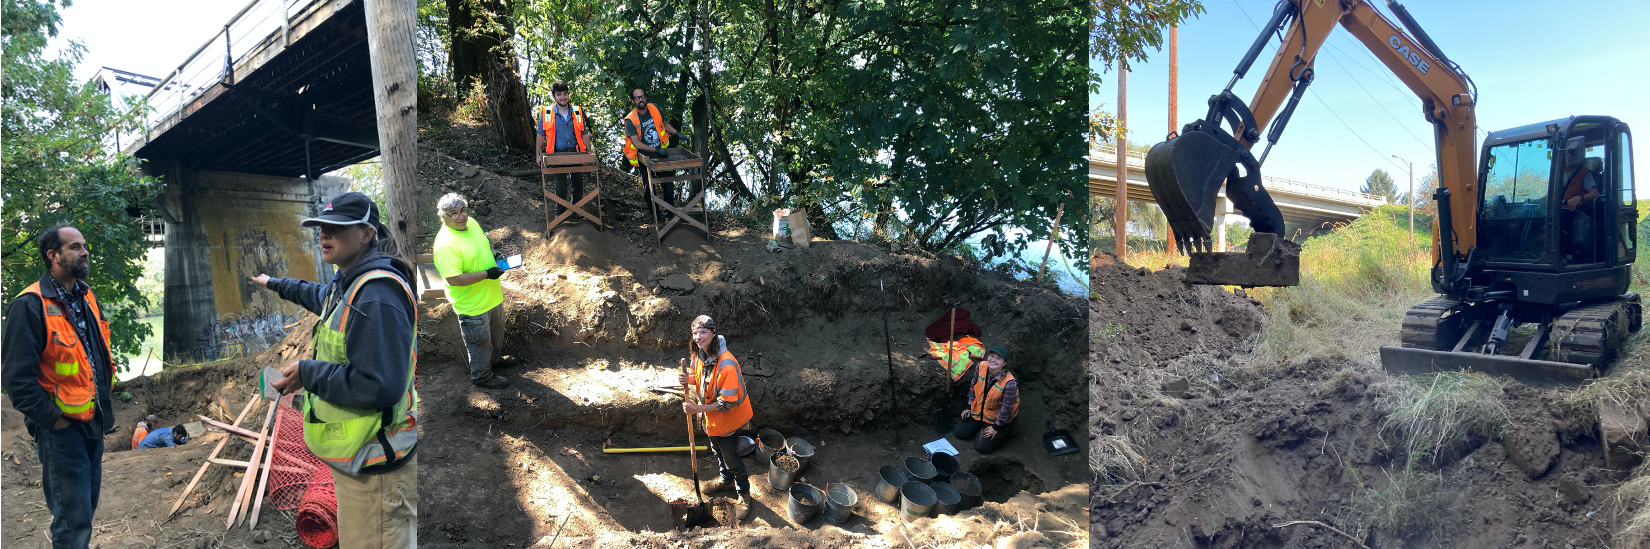 a mosaic of three photos. First is Chris and Marlene, a white man with a beard and a white woman with a ponytail, chatting in the shadow of the bridge while two people dig in the background. Second is a group of five people all wearing high-viz gear in various stages of digging. Third is an earth mover excavating some soil